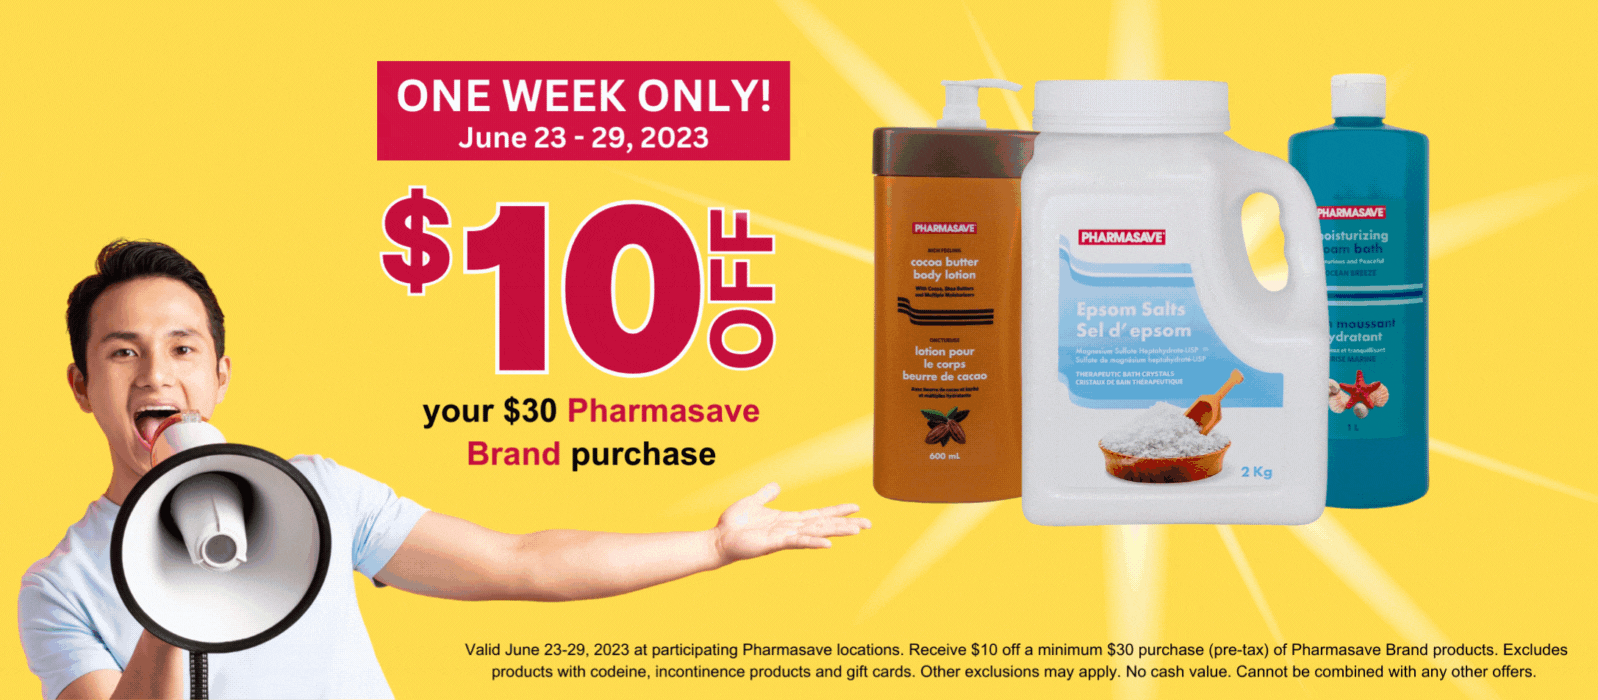 $10 off a $30 purchase of Pharmasave Brand products from June 23-29, 2023